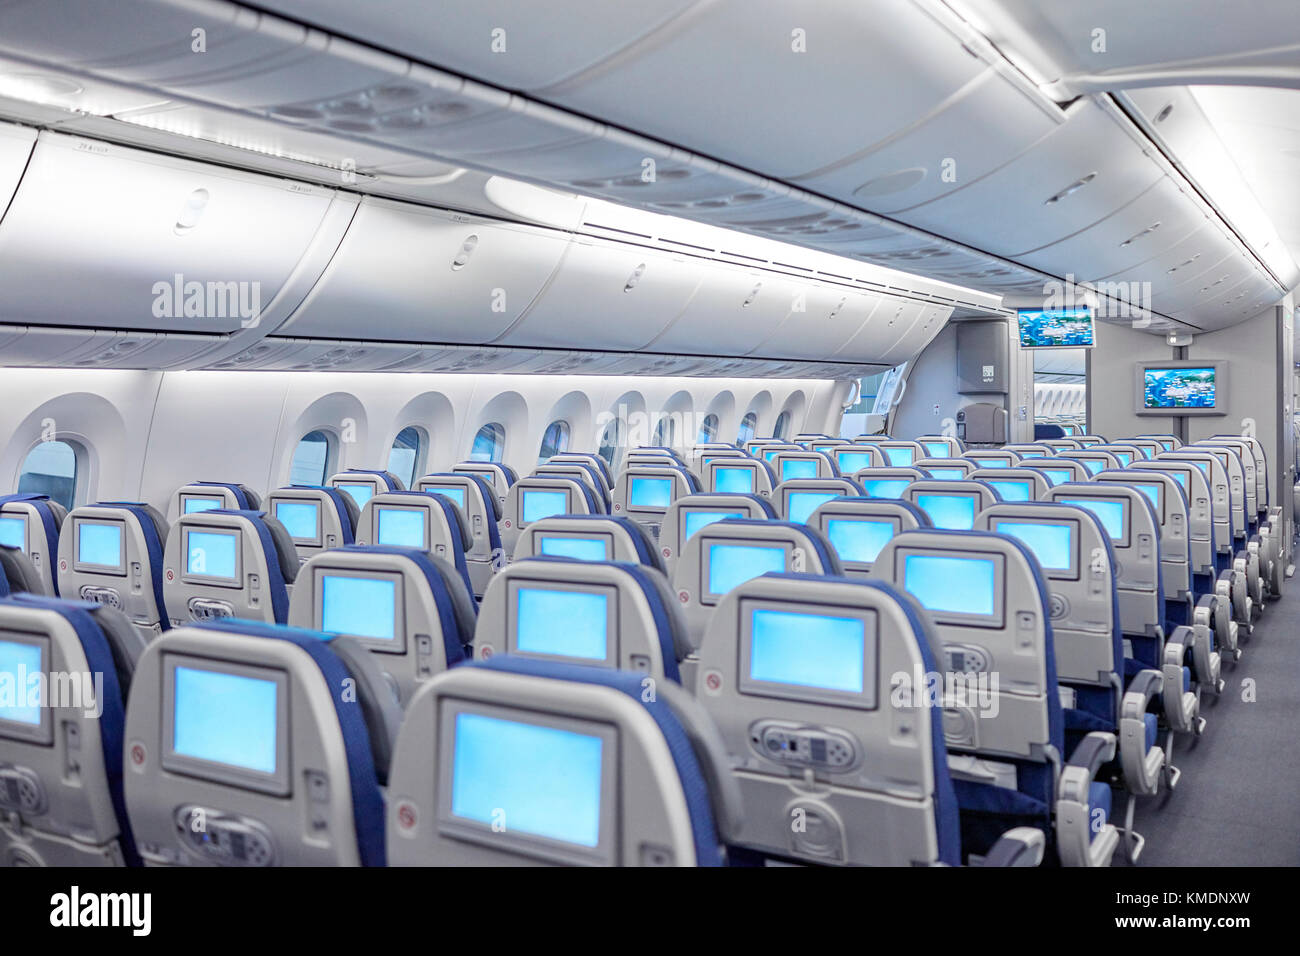 Rows of seats with entertainment screens on airplane Stock Photo